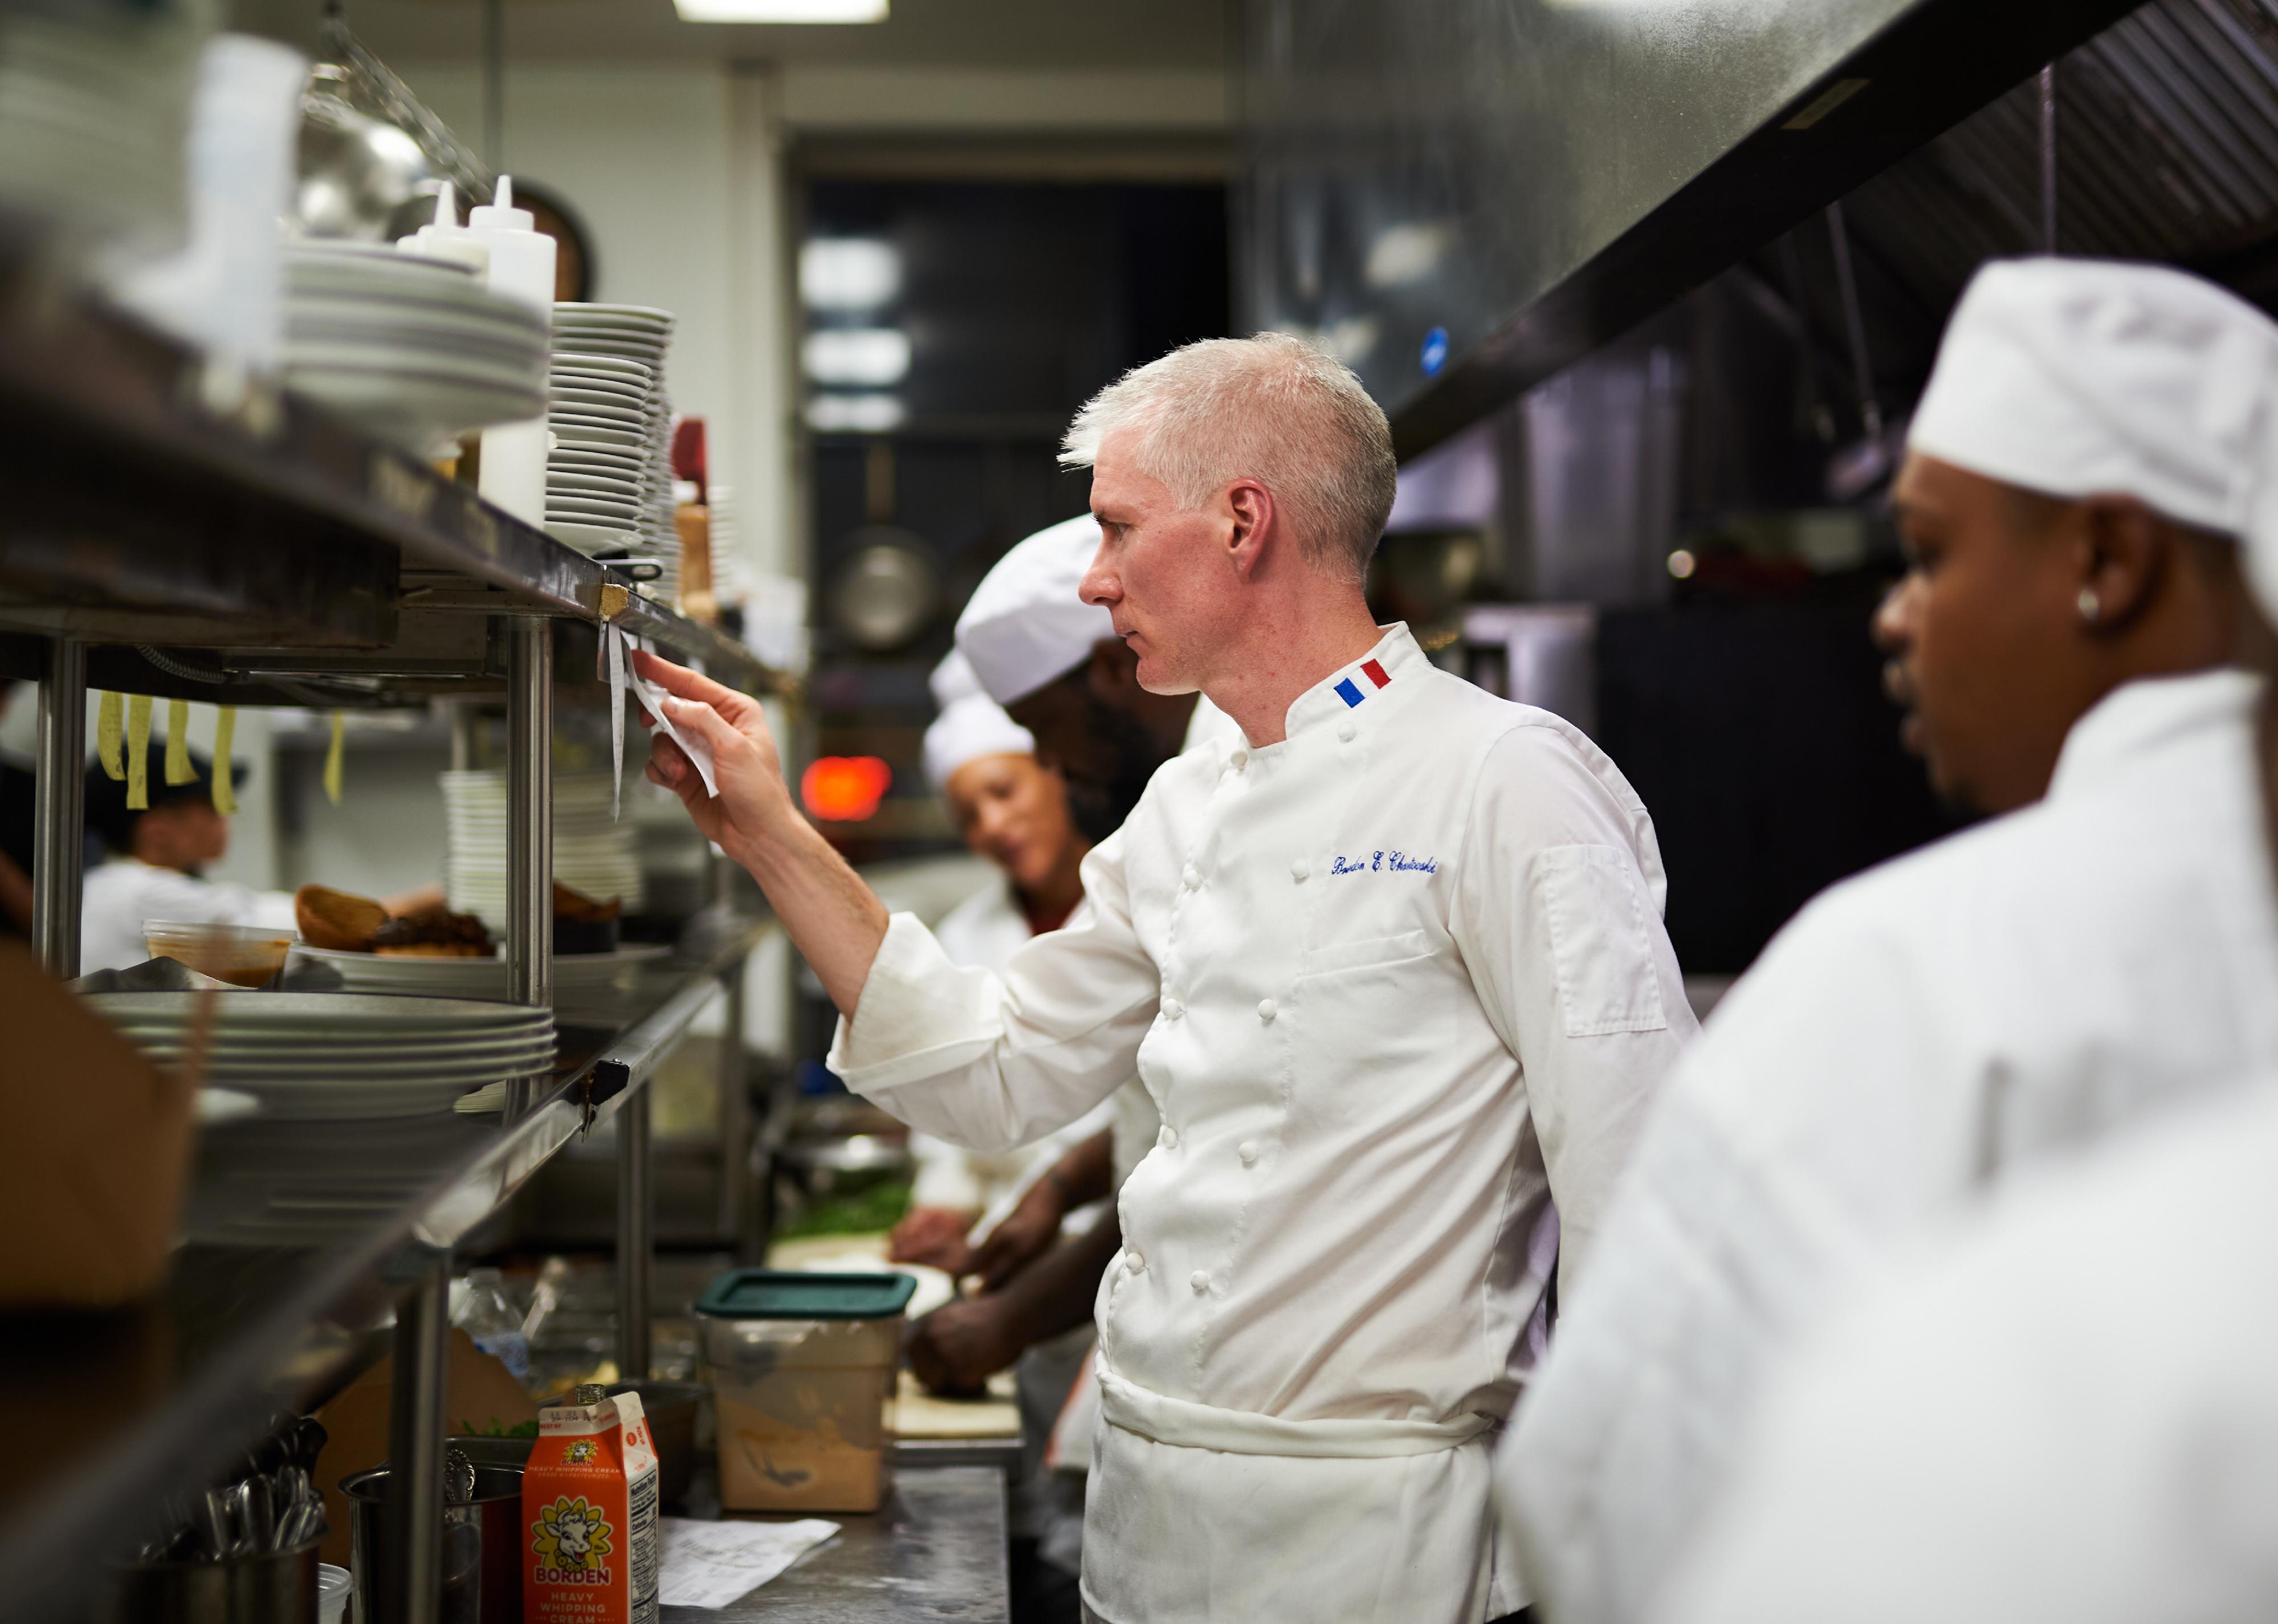 A chef works with his employees at a restaurant